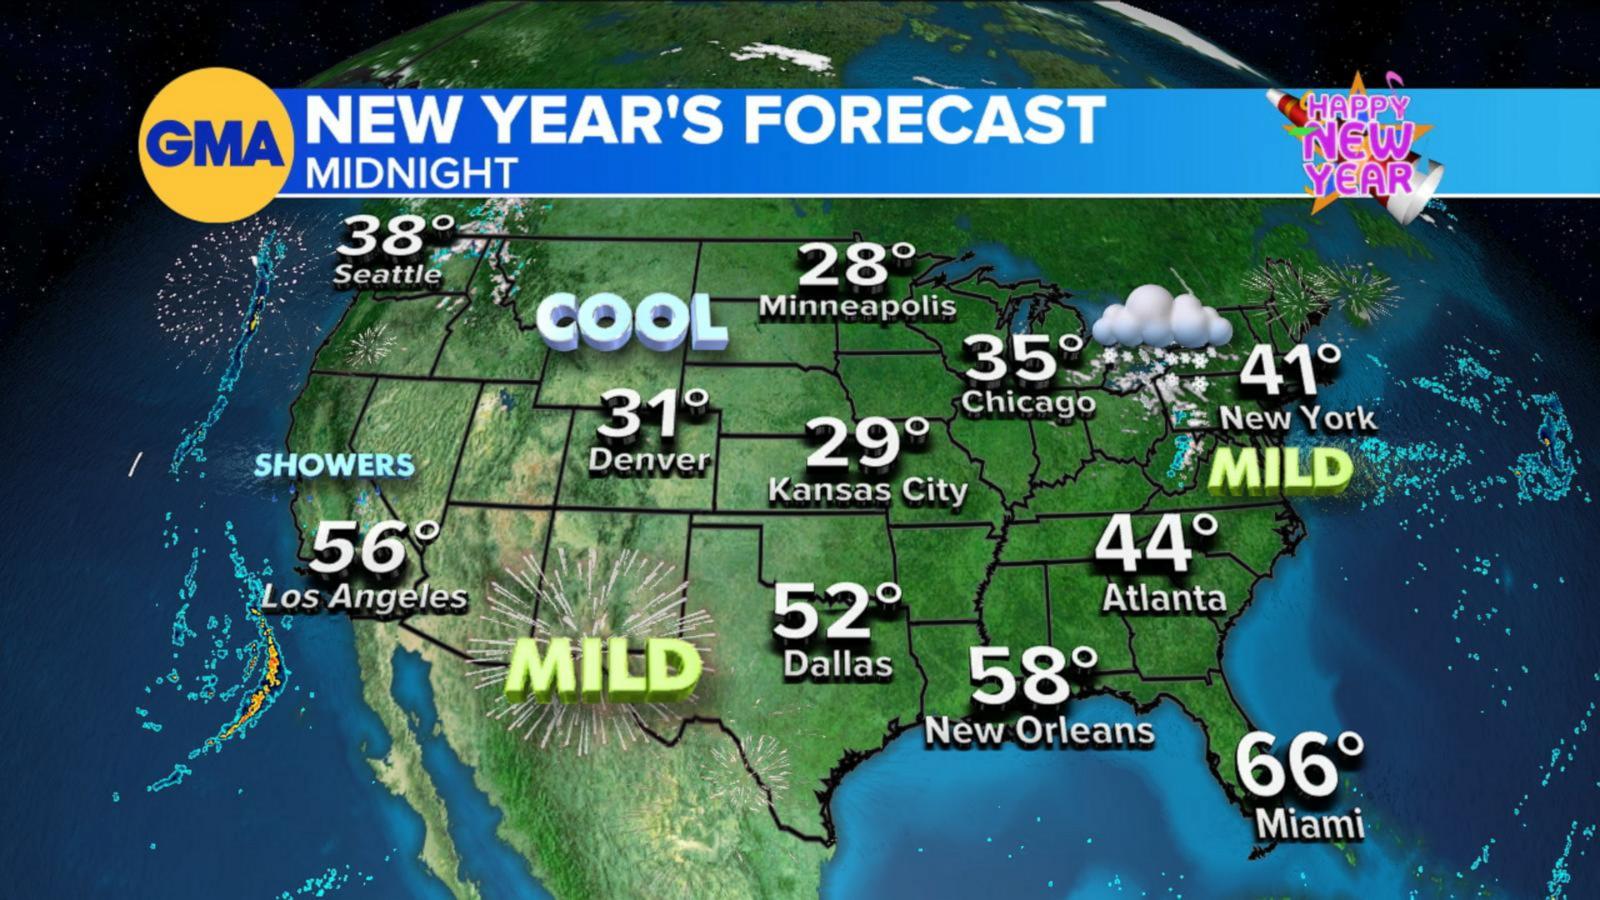 VIDEO: A look at New Year’s Eve forecast